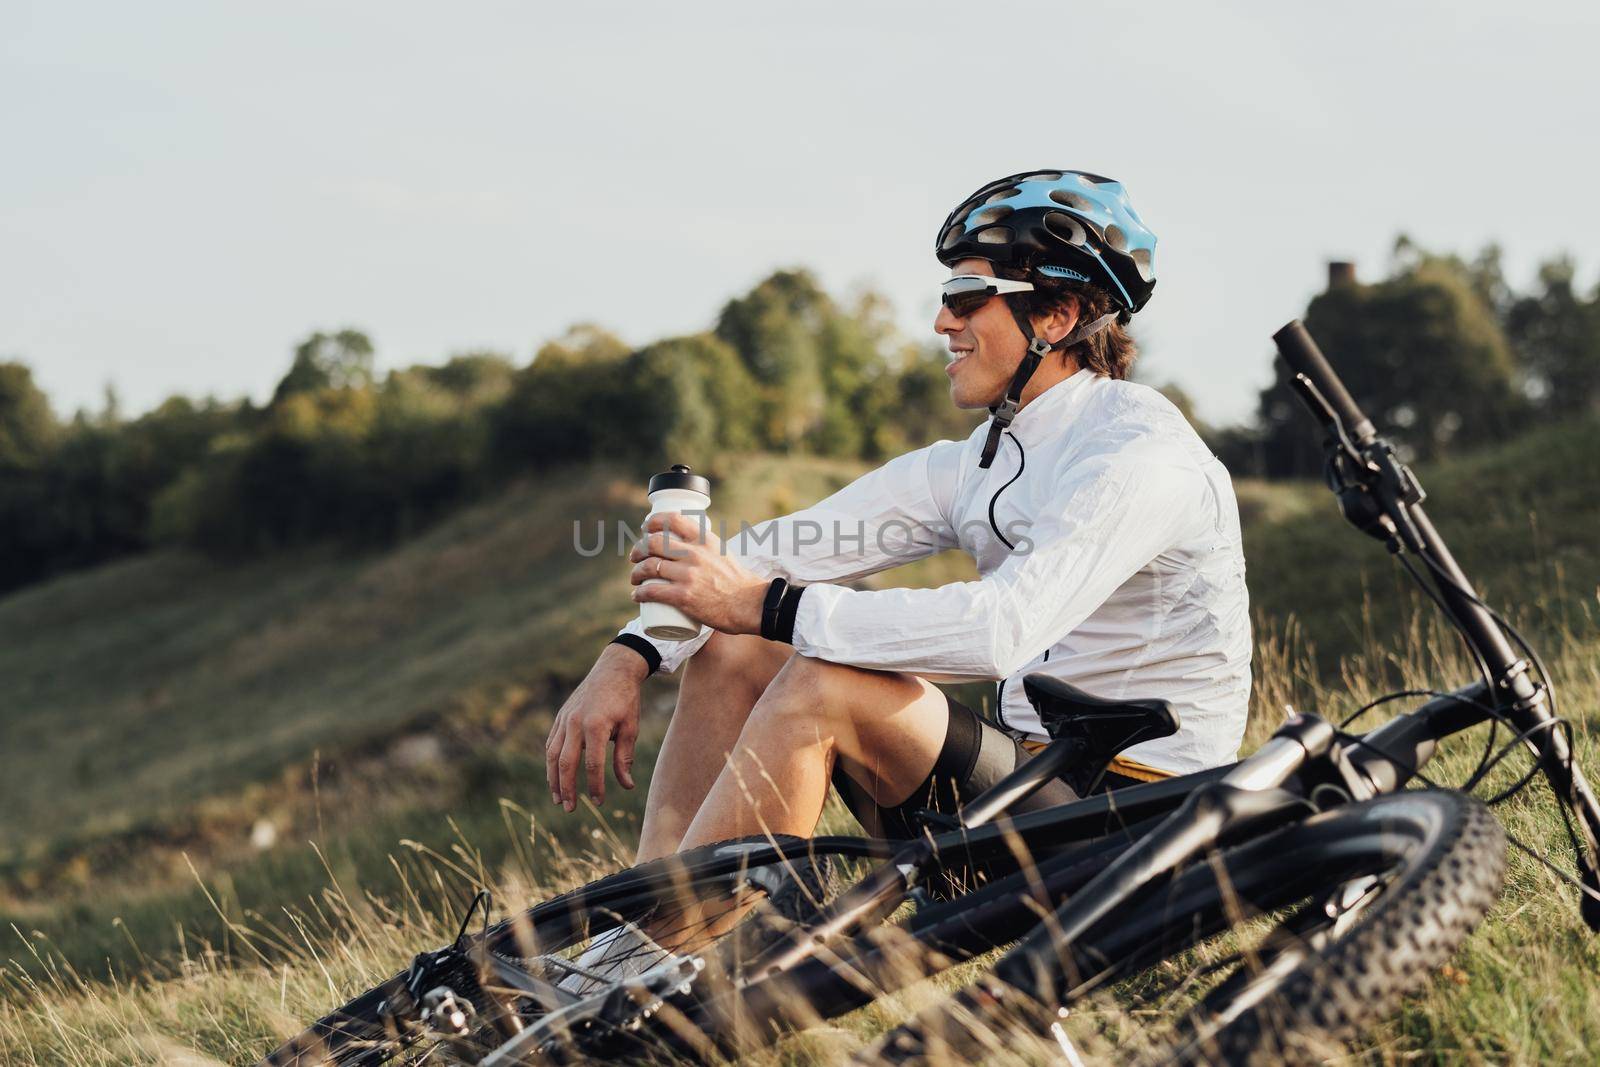 Professional Male Cyclist Drinking Water from Bottle, Man Sitting Near Bicycle During His Journey Outdoors in Countryside